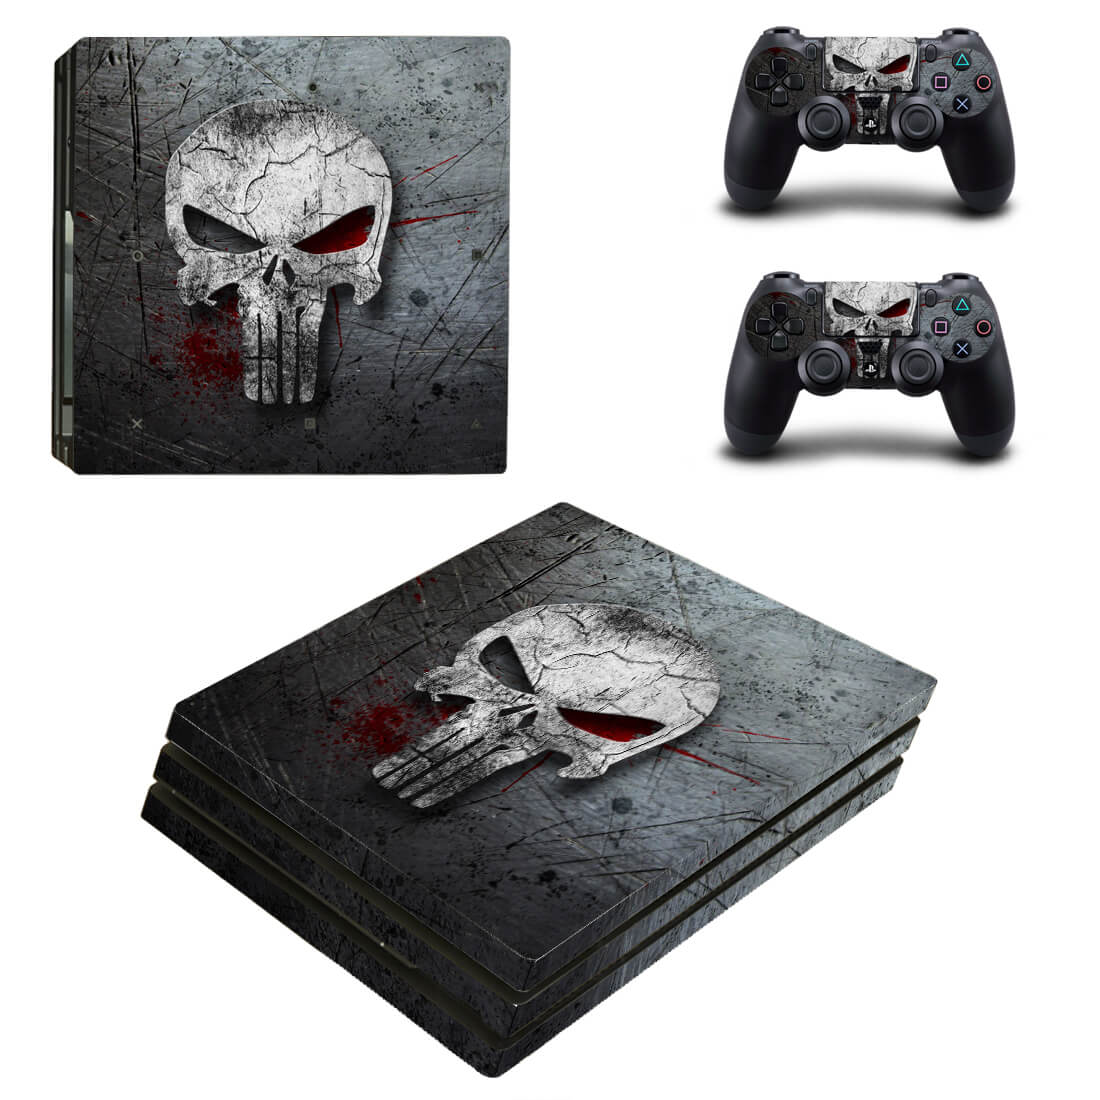 The Punisher PS4 Pro skin